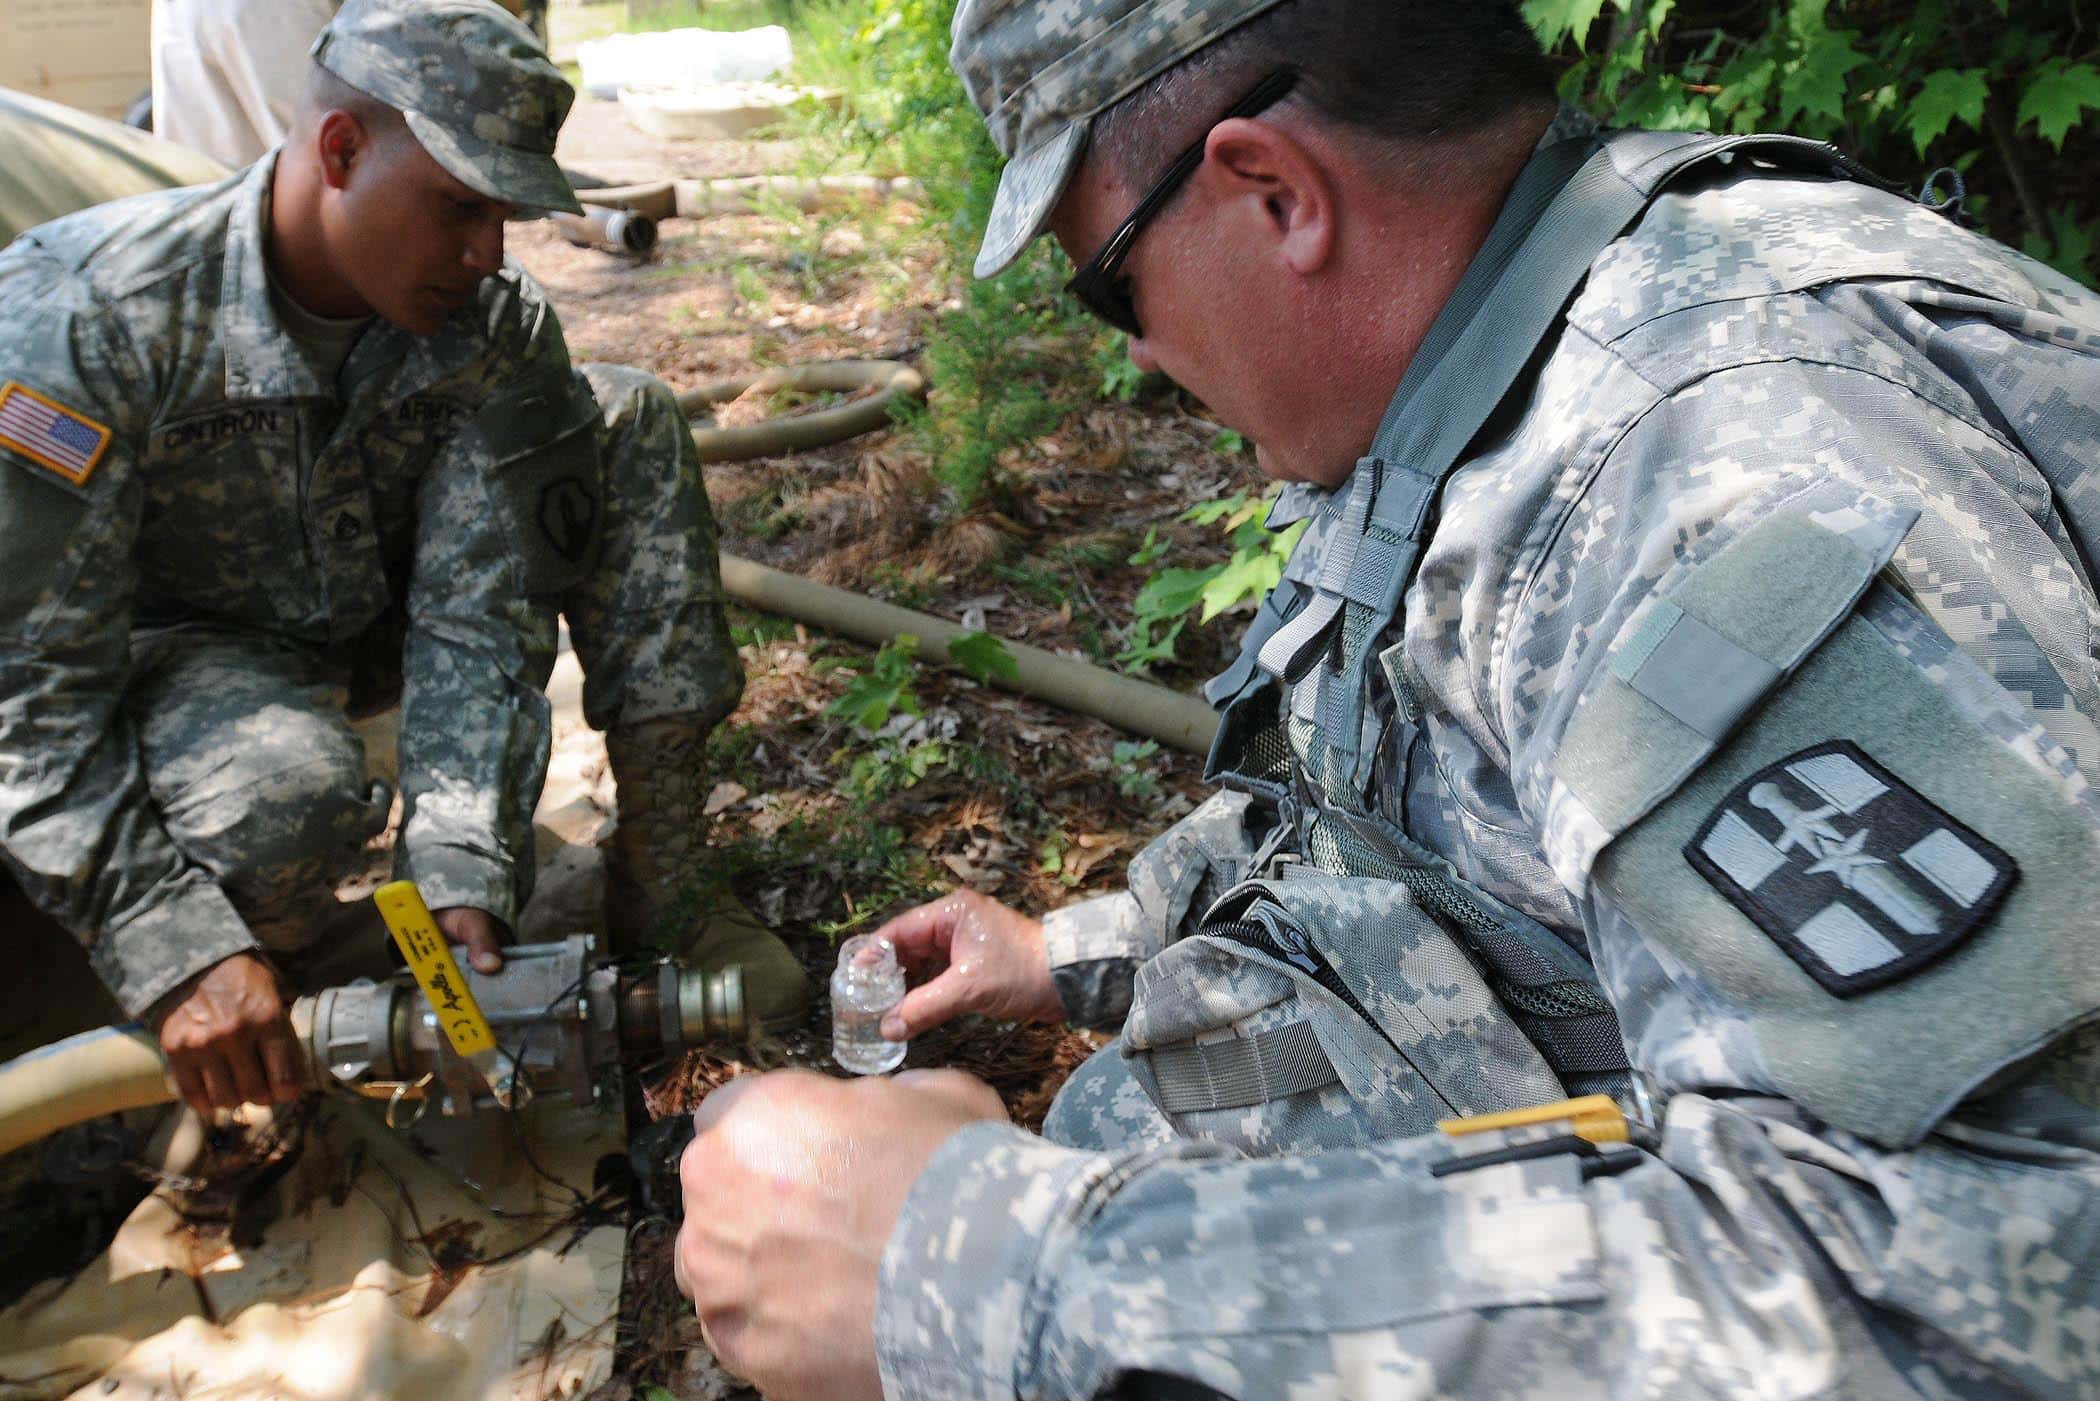 Staff Sgt. Angel Cintron (left), 973rd Quartermaster Company, assists Maj. James J. Houlihan, 1893rd Medical Detachment, obtain a water sample from a bladder of purified water to be tested for micro bacterial contamination. During the nationwide Quartermaster Liquid Logistics Exercise 2011, the 973rd operated the Reverse Osmosis Water Purification Unit that purified water from a local pond used for the Expeditionary Water Packaging System, and for laundry and bath purposes.